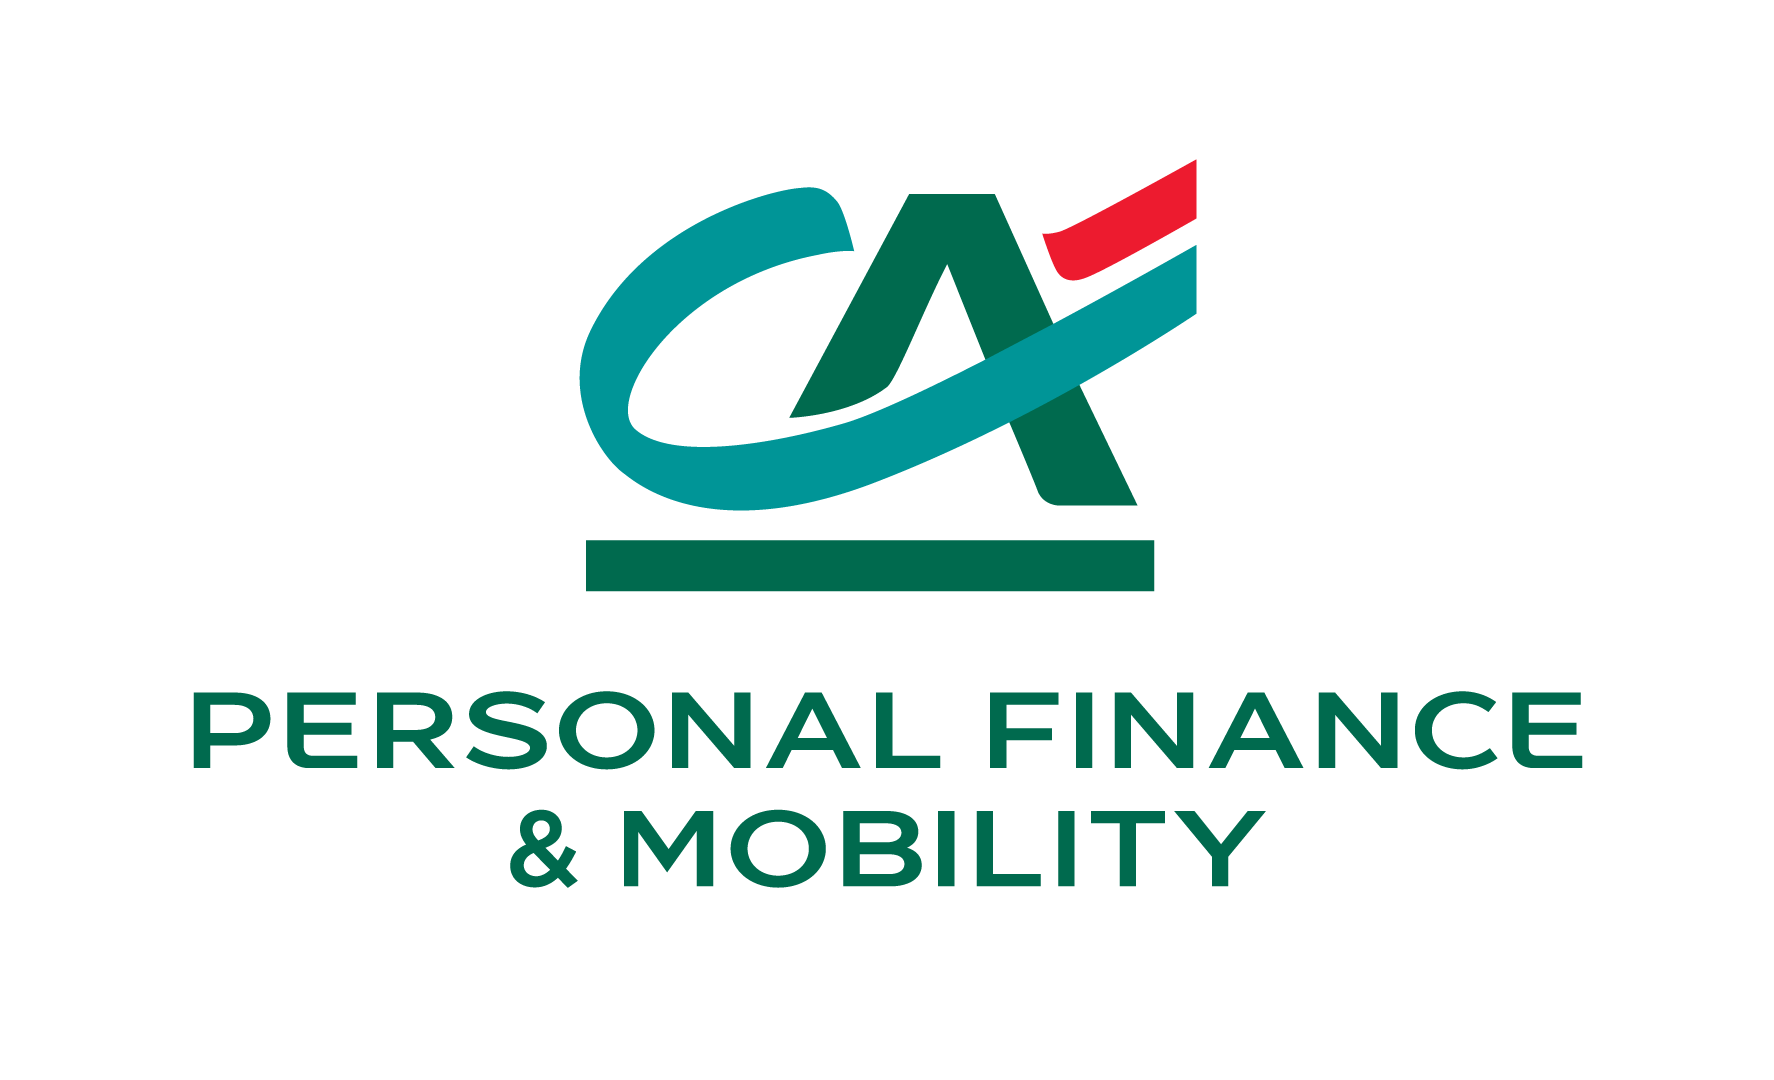 Credit Agricole Personal Finance & Mobility - ASG